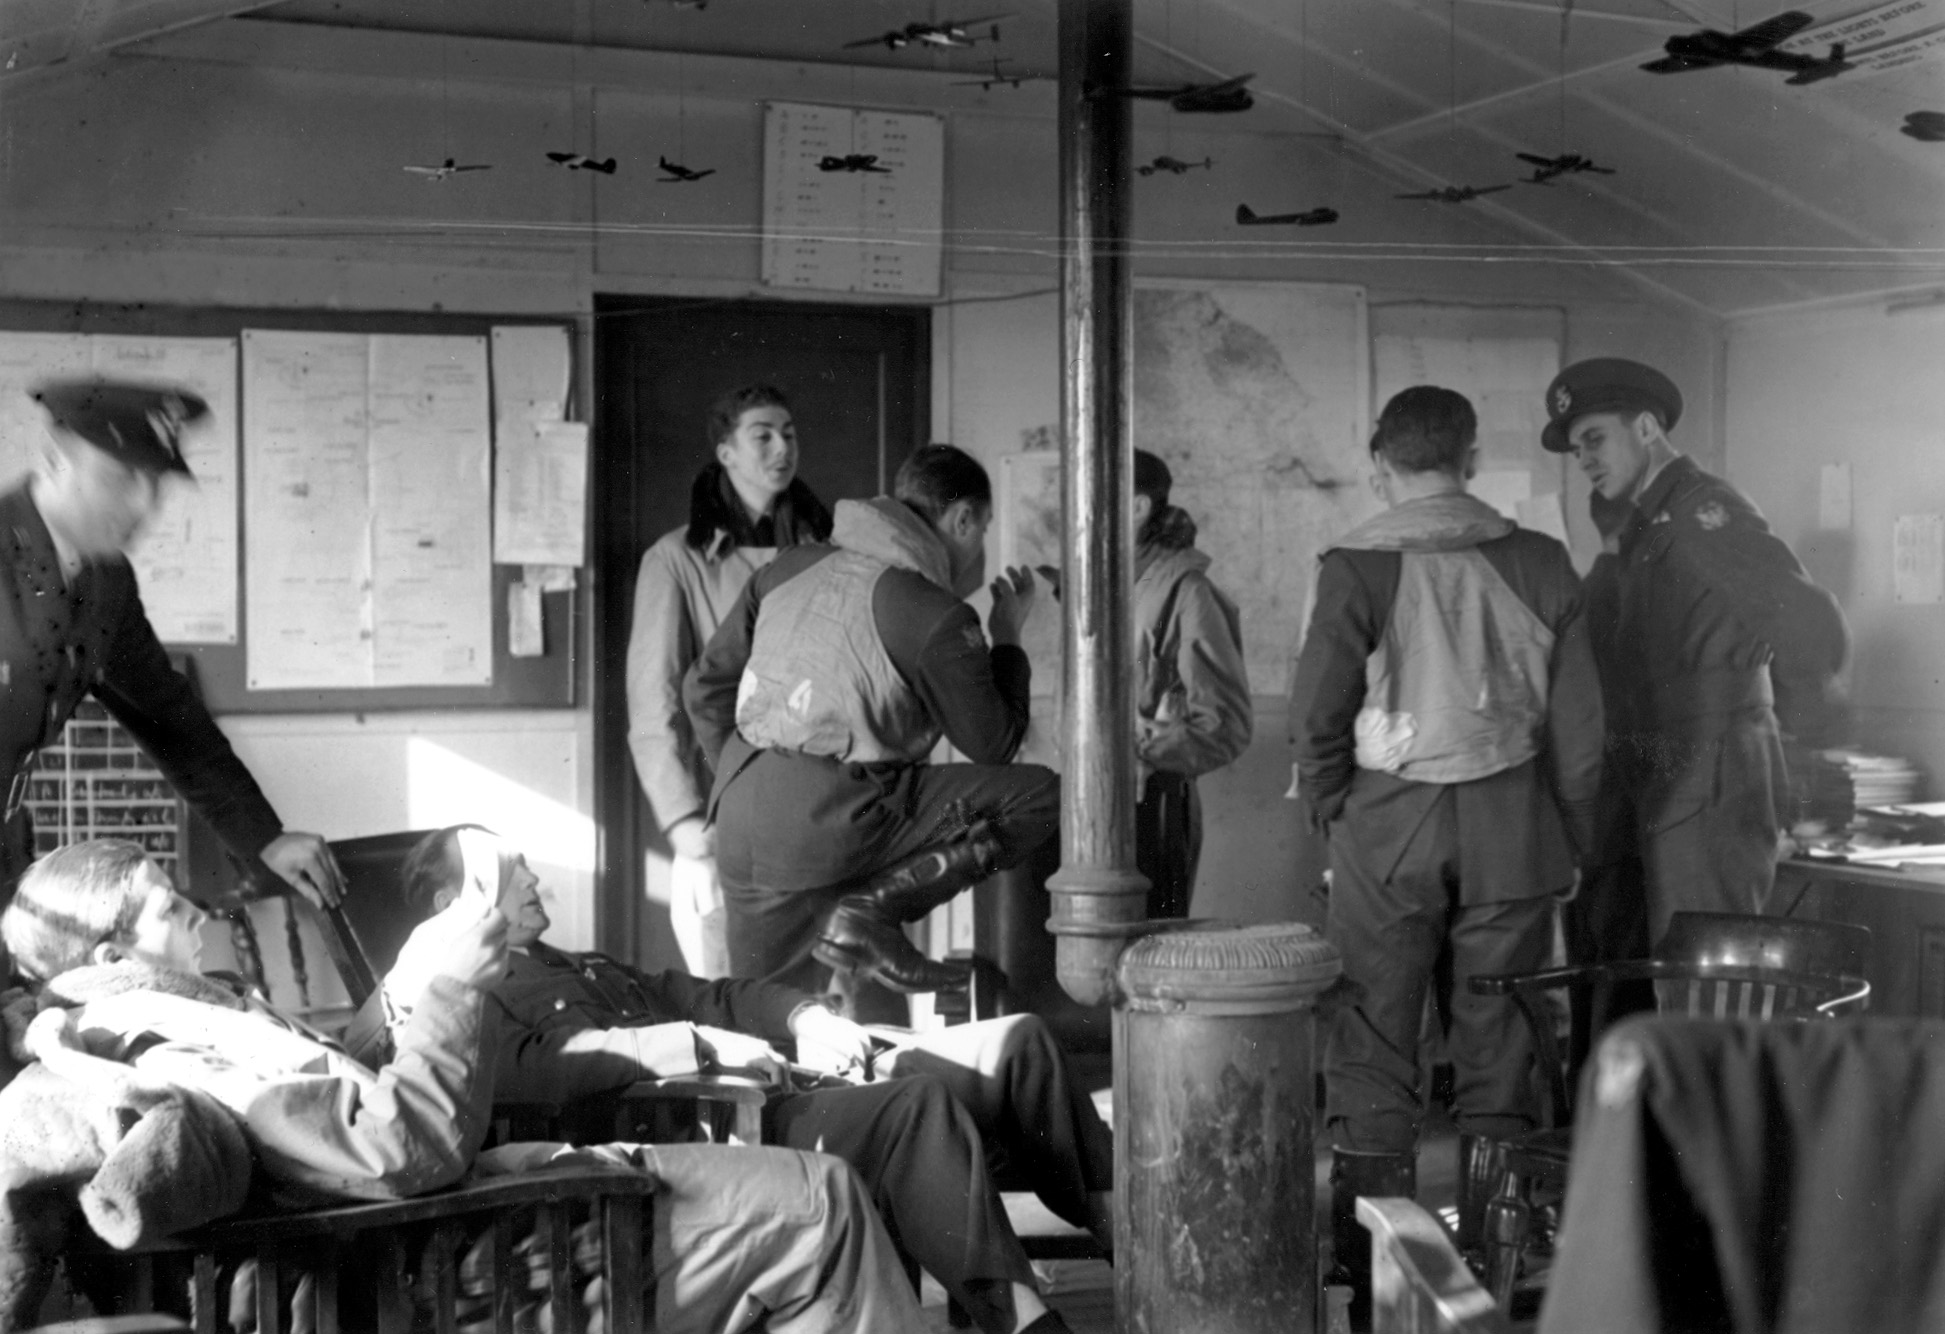 Eagle Squadron pilots engage in lively chatter and lounge around a dispersal hut as they await the word to take off on a training flight.